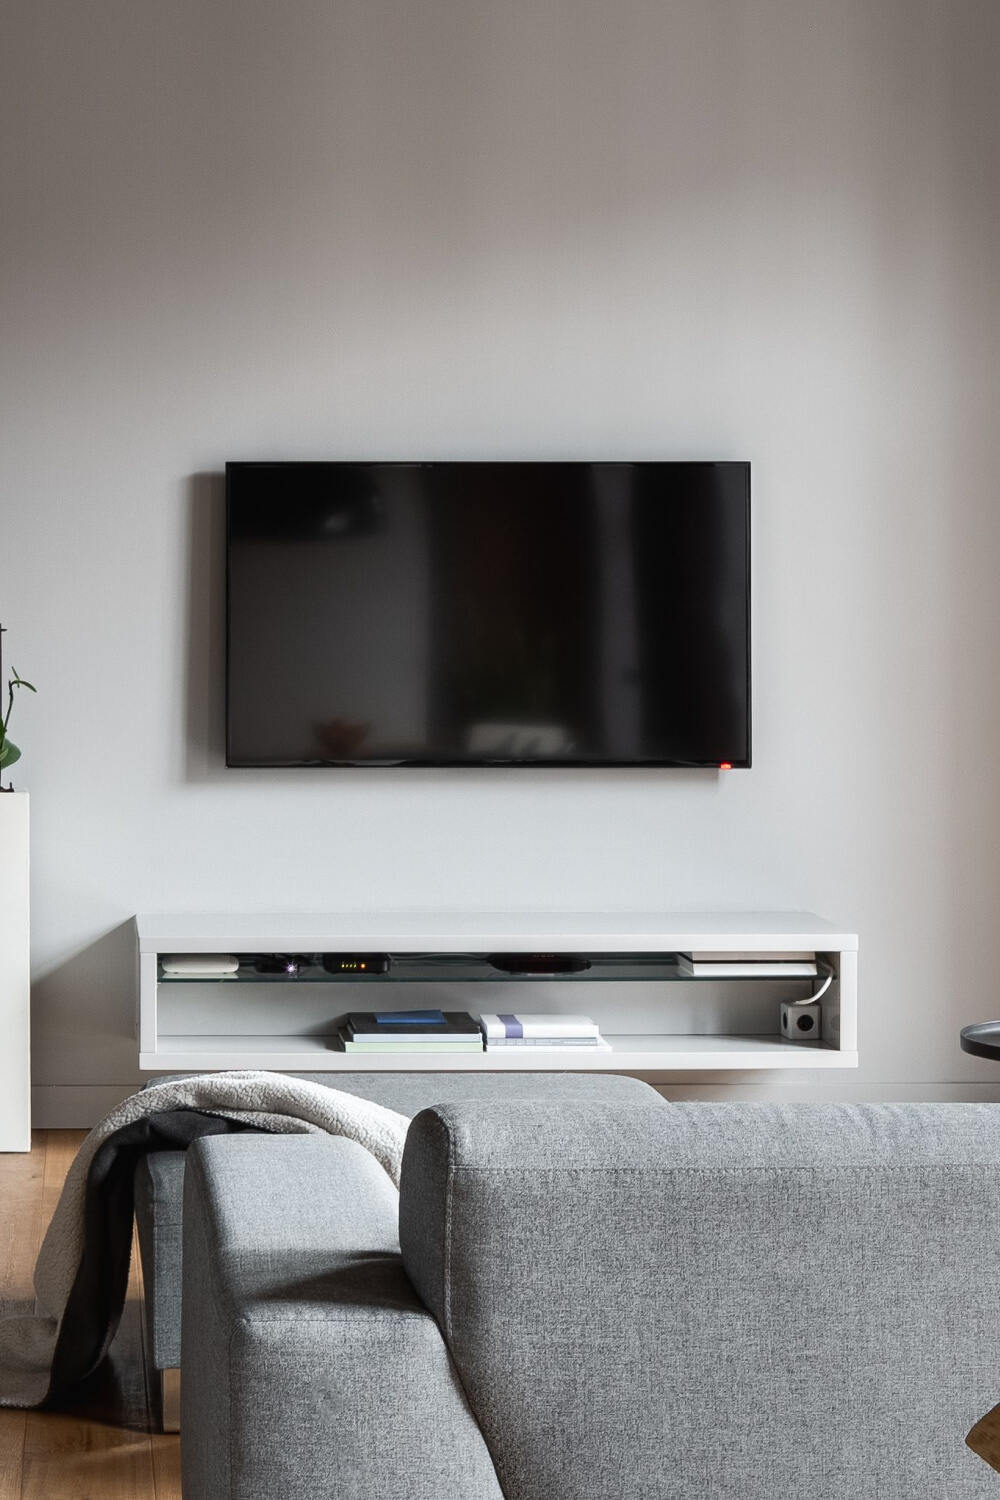 mounted tv on the wall, above a shelf